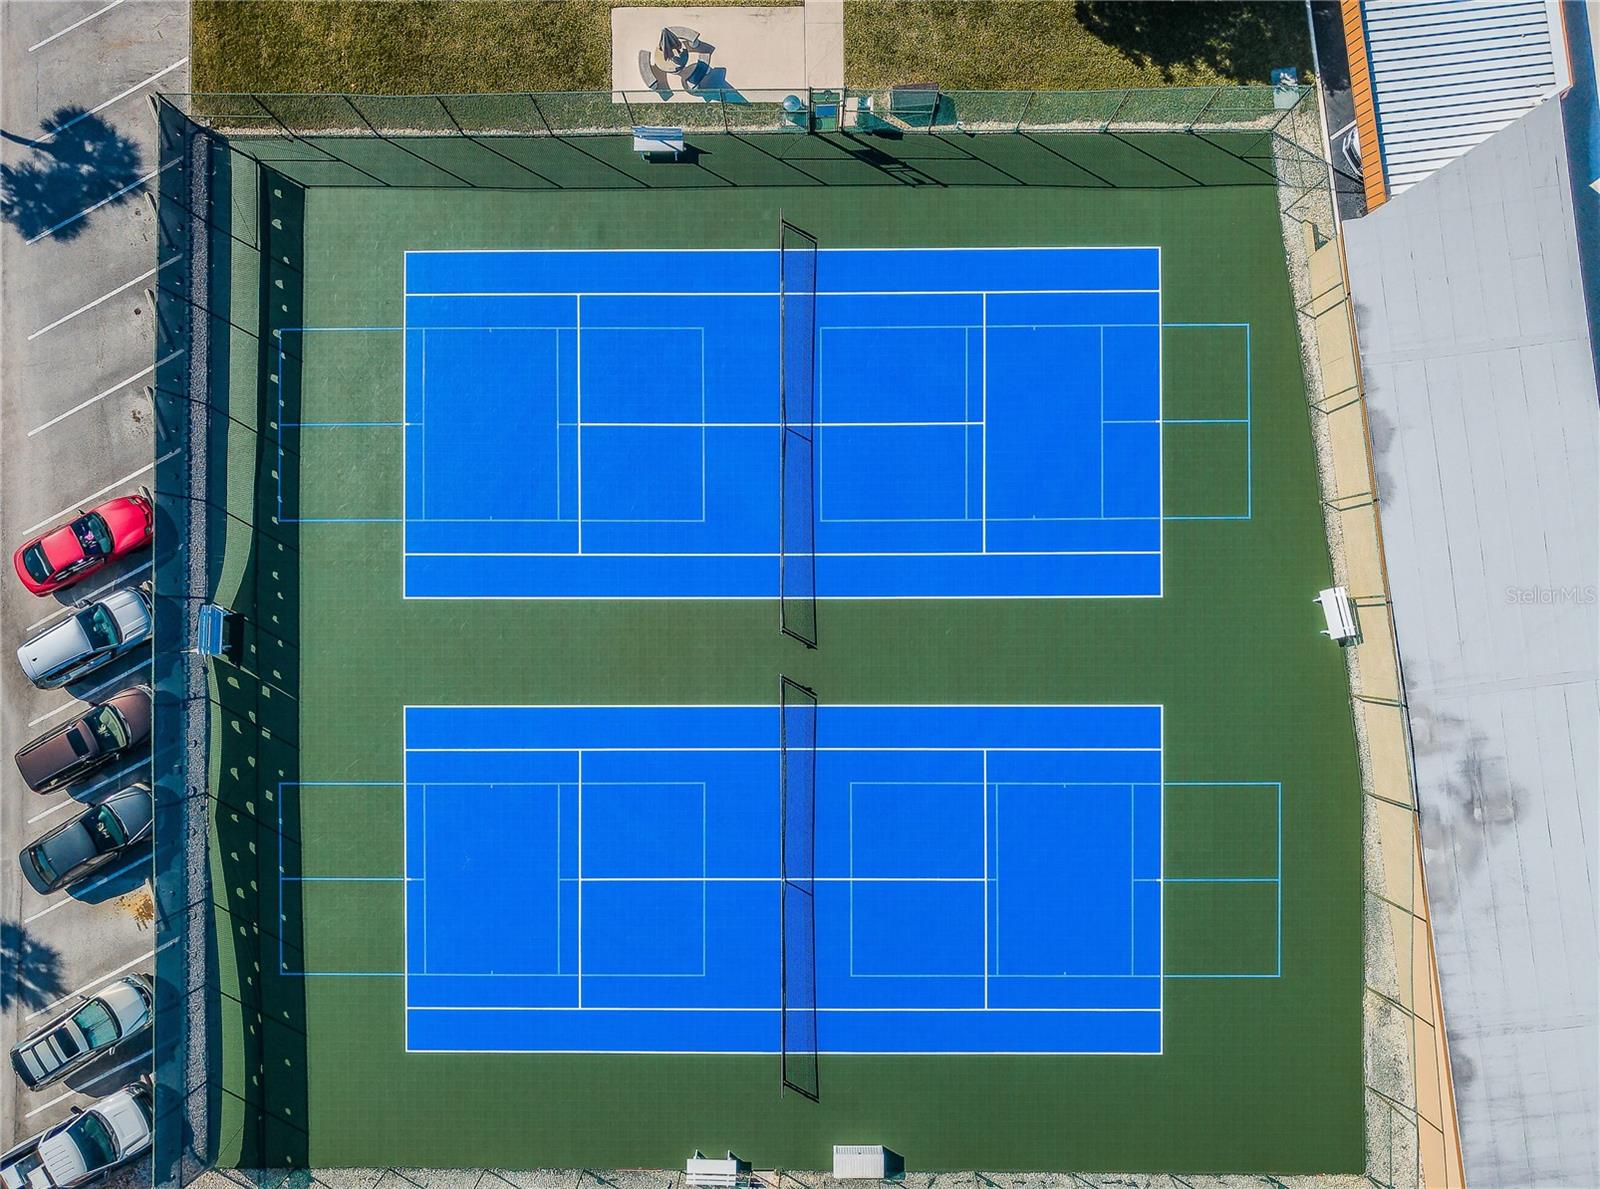 Aerial Photo of Tennis/Pickleball Courts